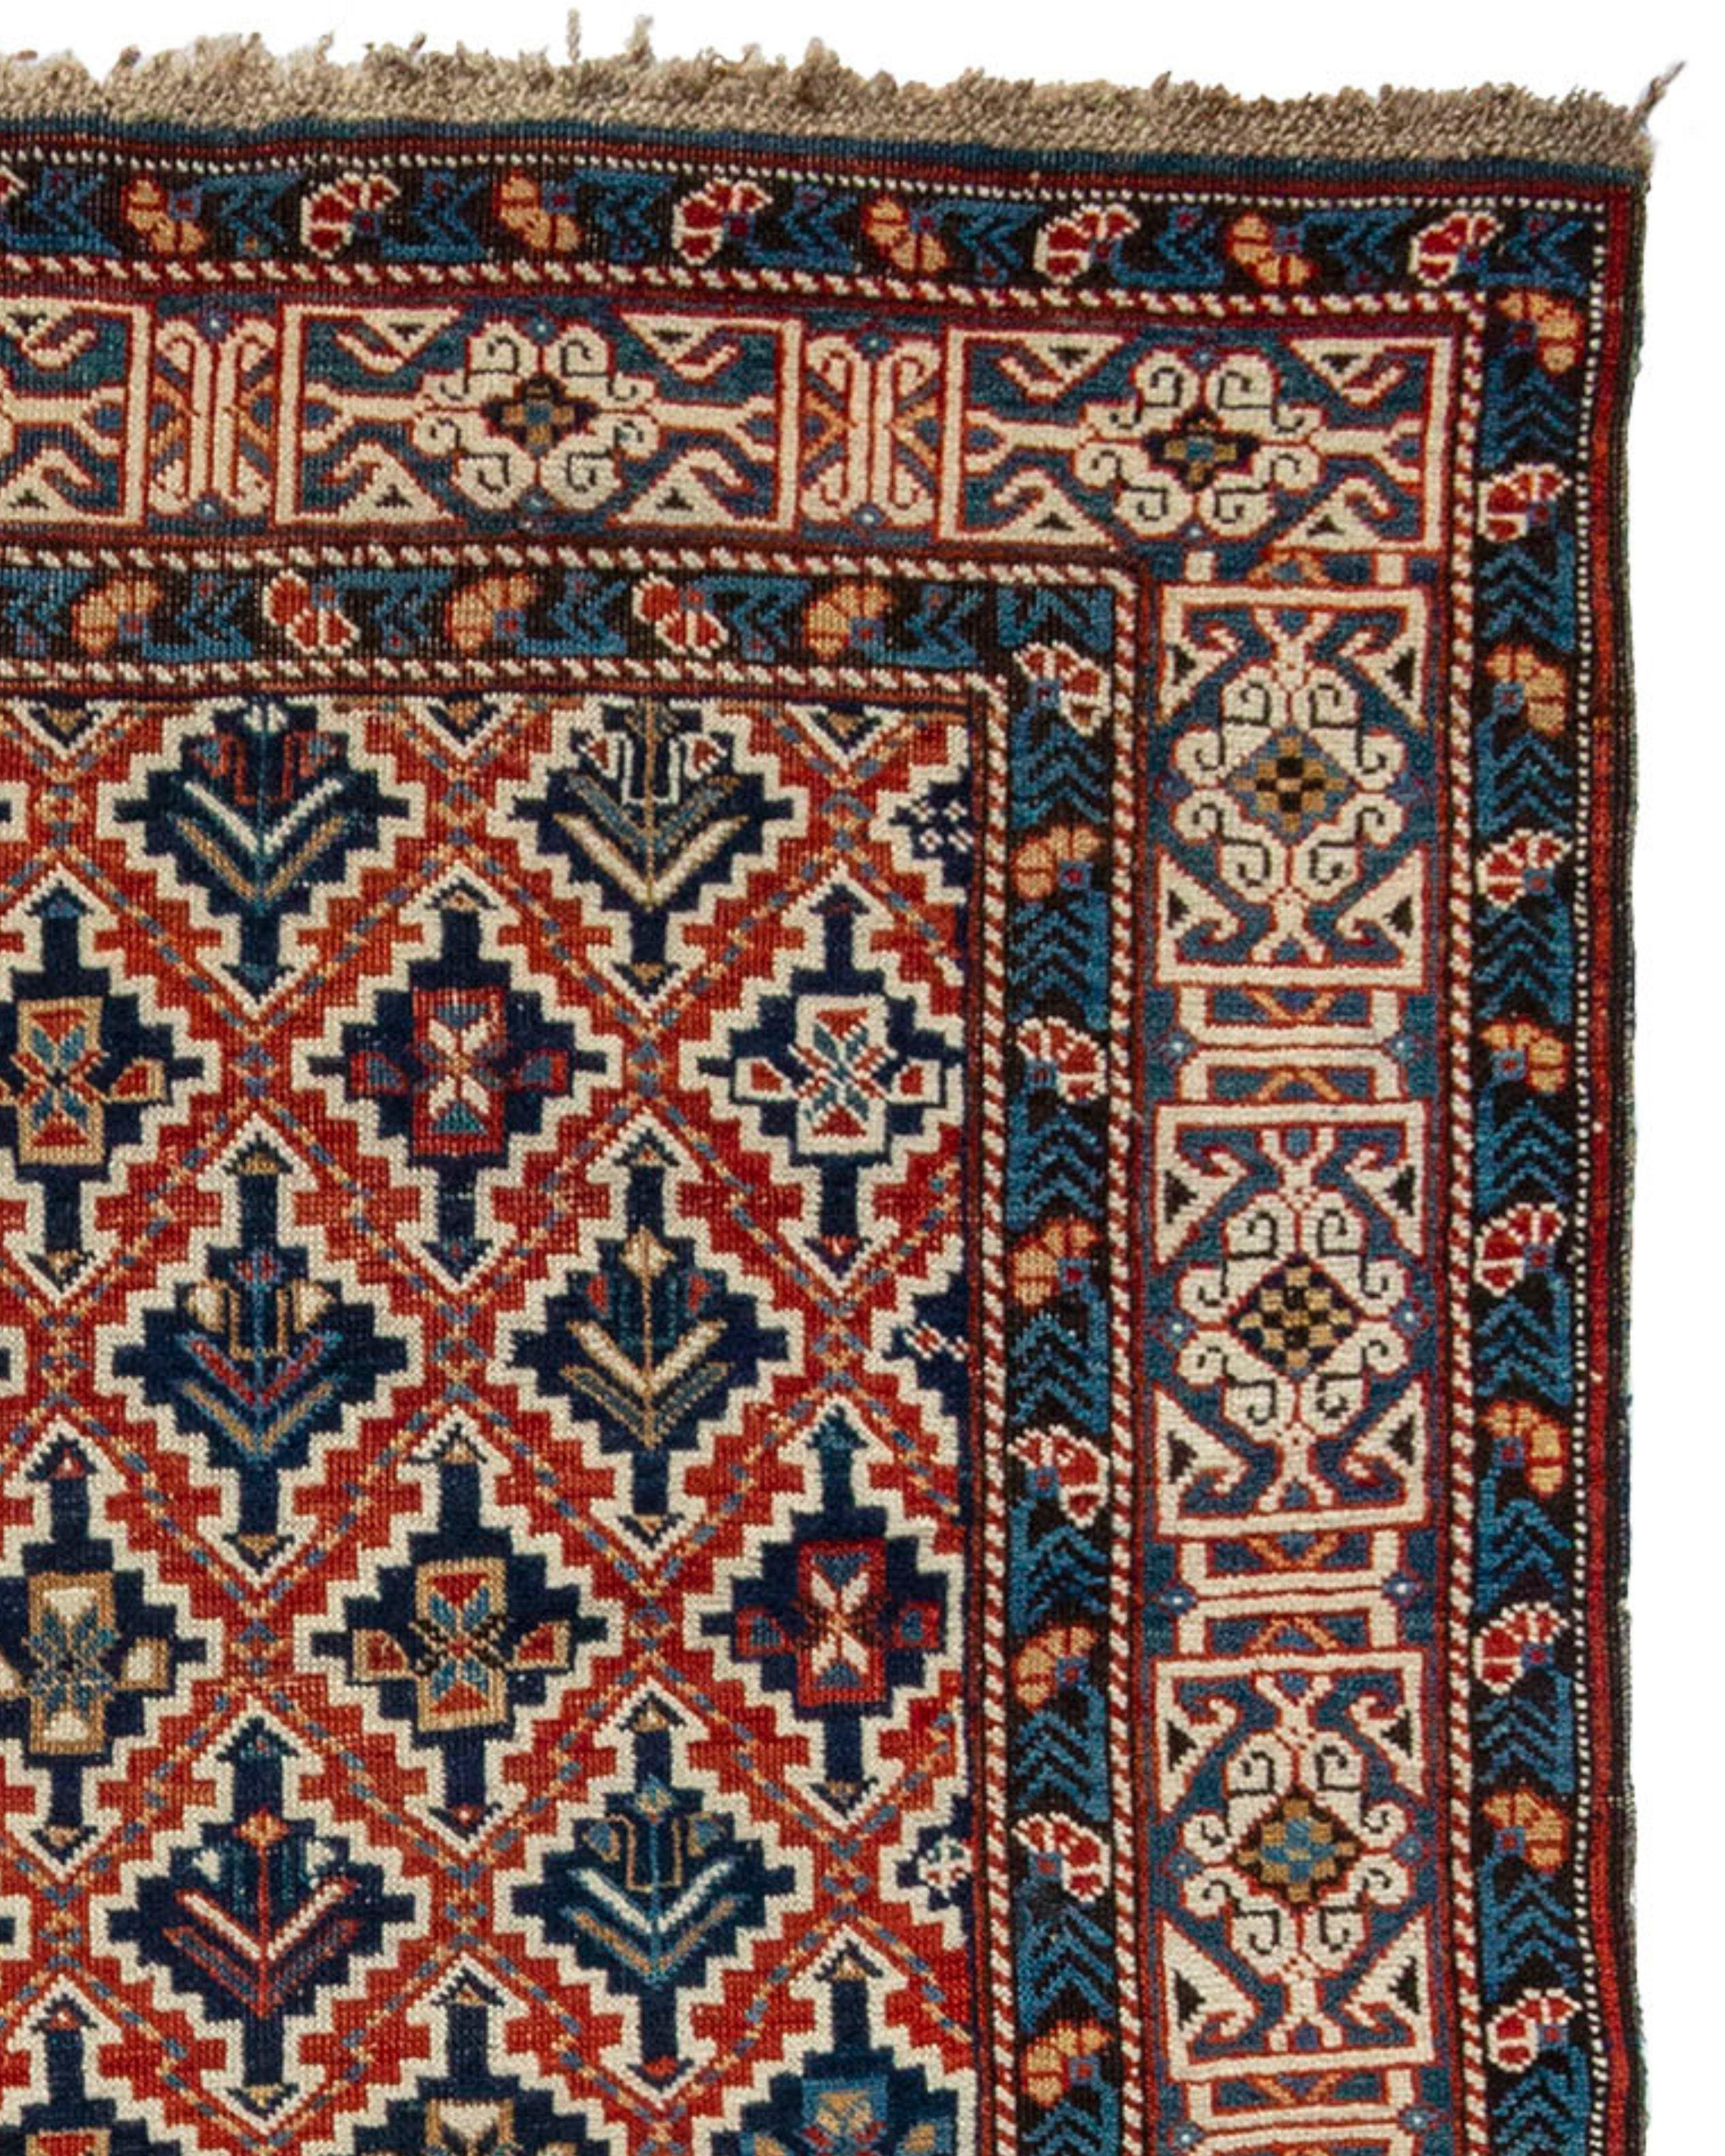 Antique Caucasian Kuba Rug, Late 19th Century

Being sold on behalf of Dr. and Mrs. Timothy McCormack

Additional information:
Dimensions: 3'8